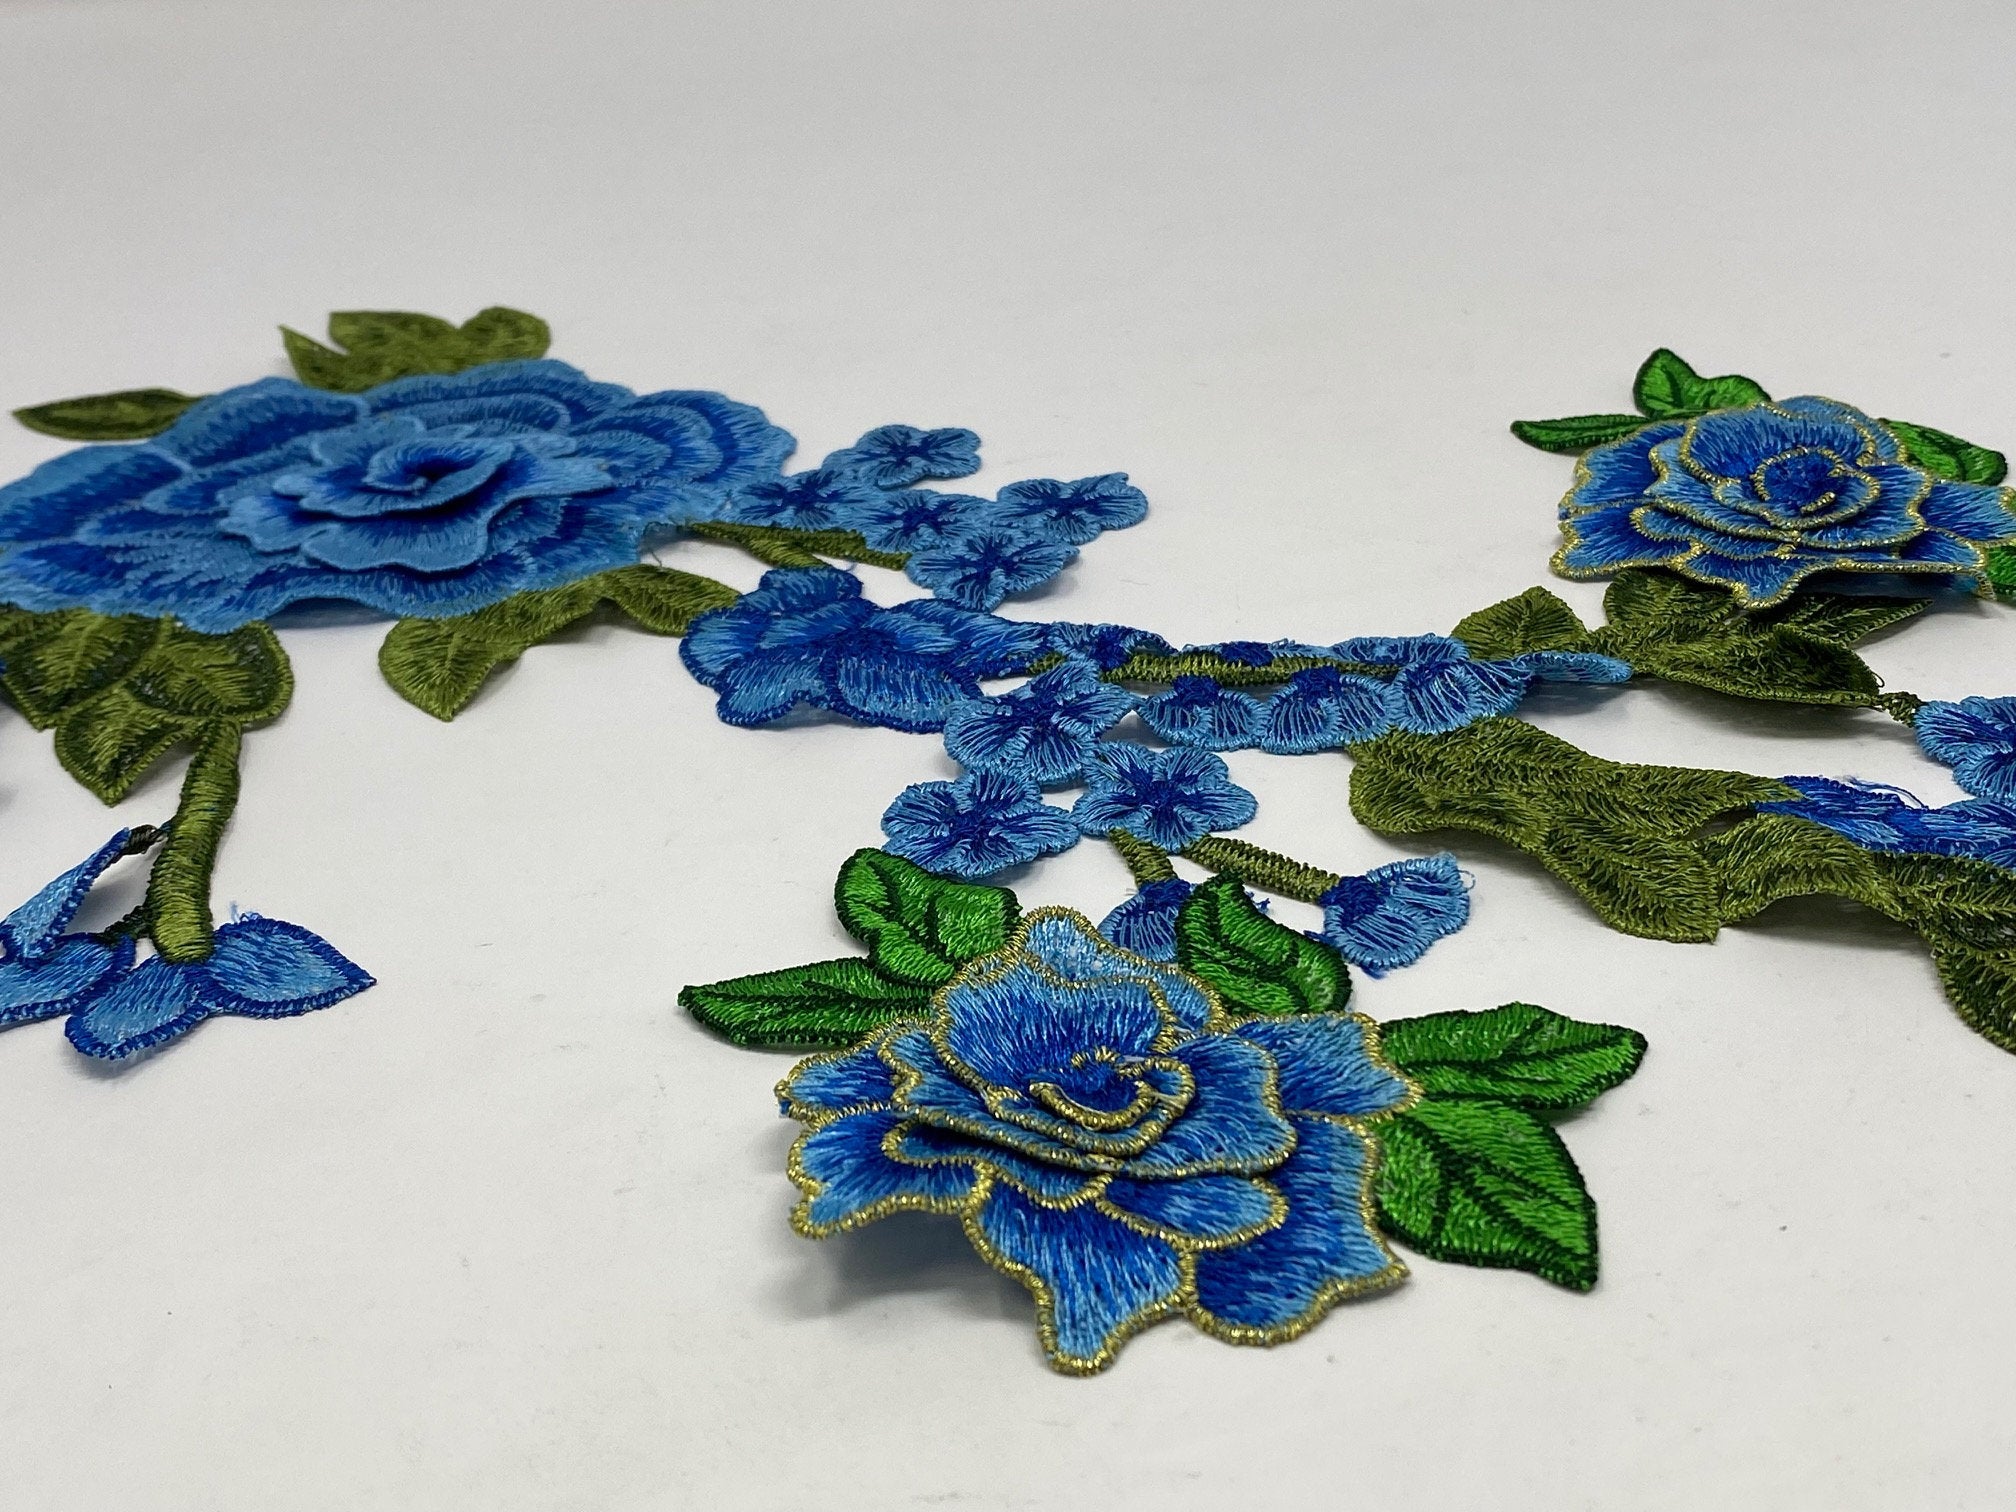 NEW, 2 Pc. 3D Blue Lace Flowers With Leaves and Stems, Sew-on Lace Flower Set, Great for Shoes, Denim, Jackets, Etc., Size 14 inches